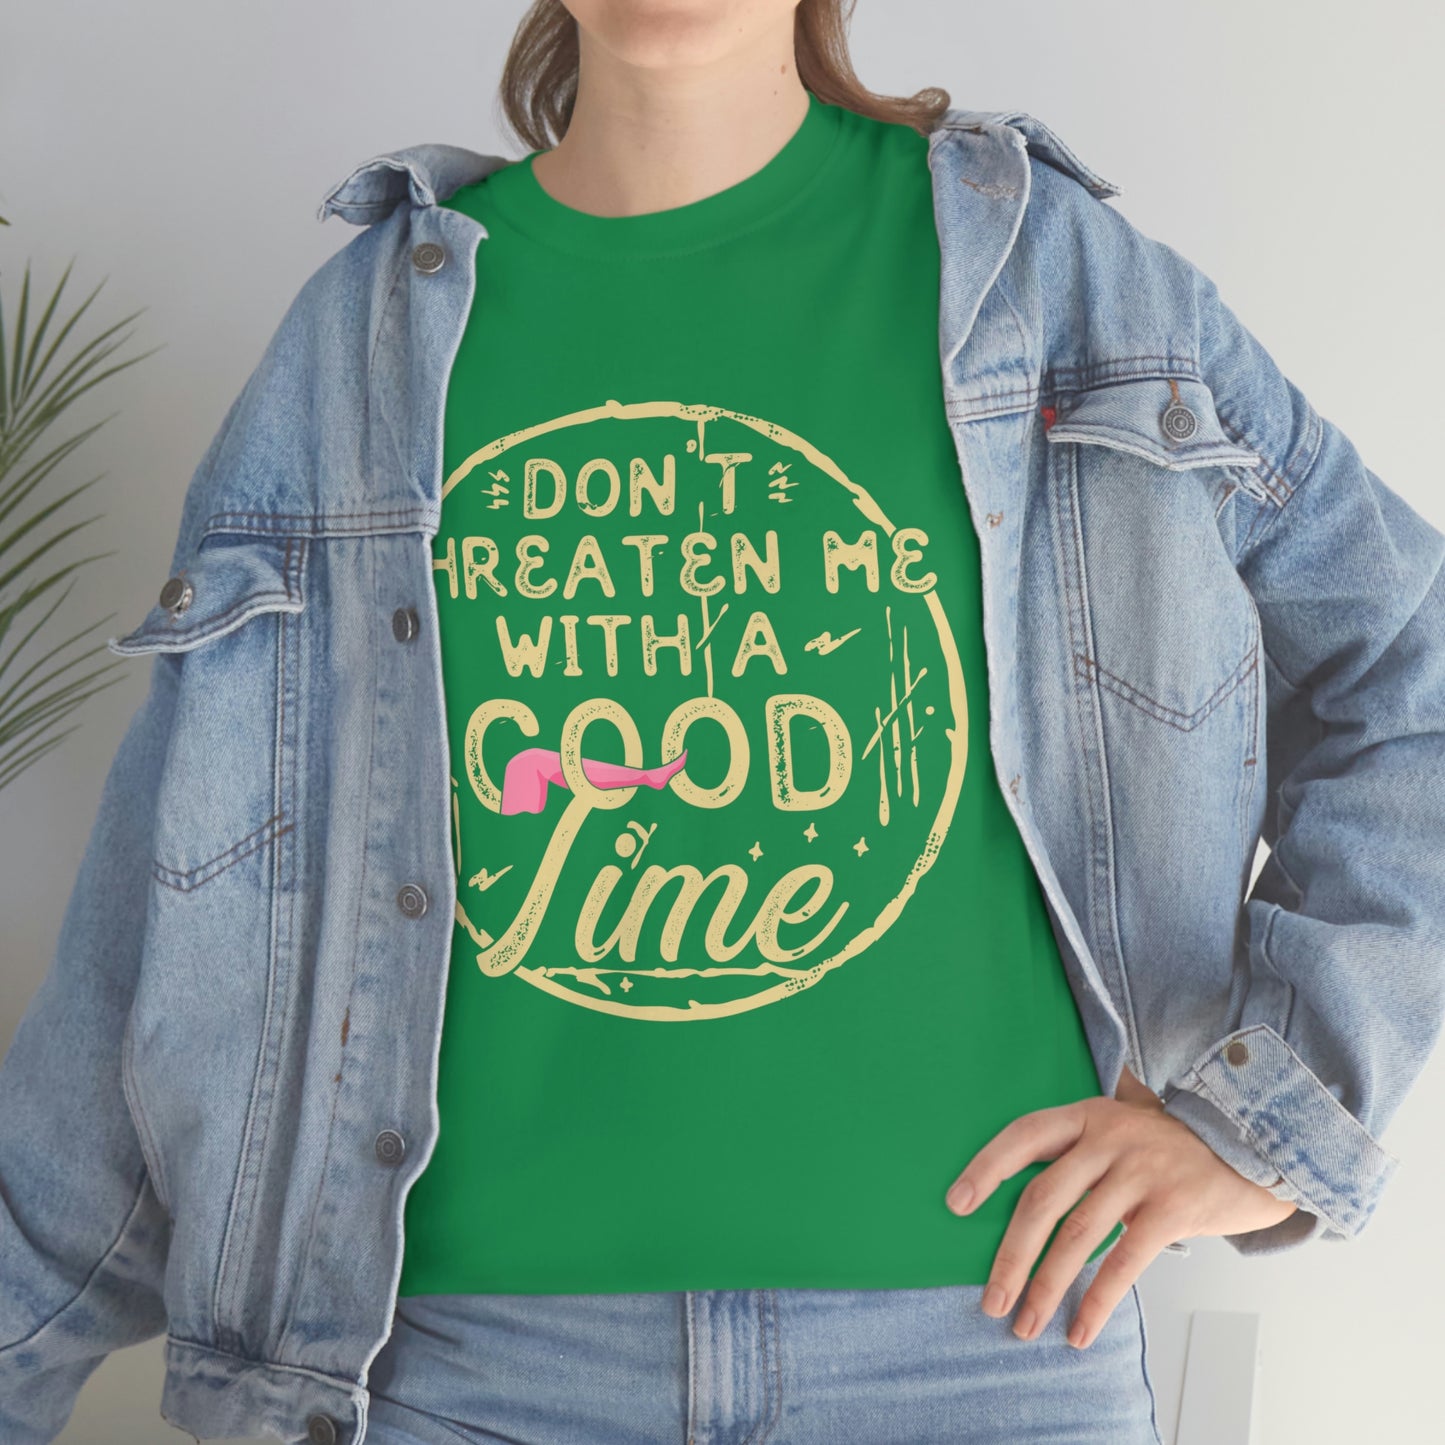 Don't Threaten Me With a Good Time Tee